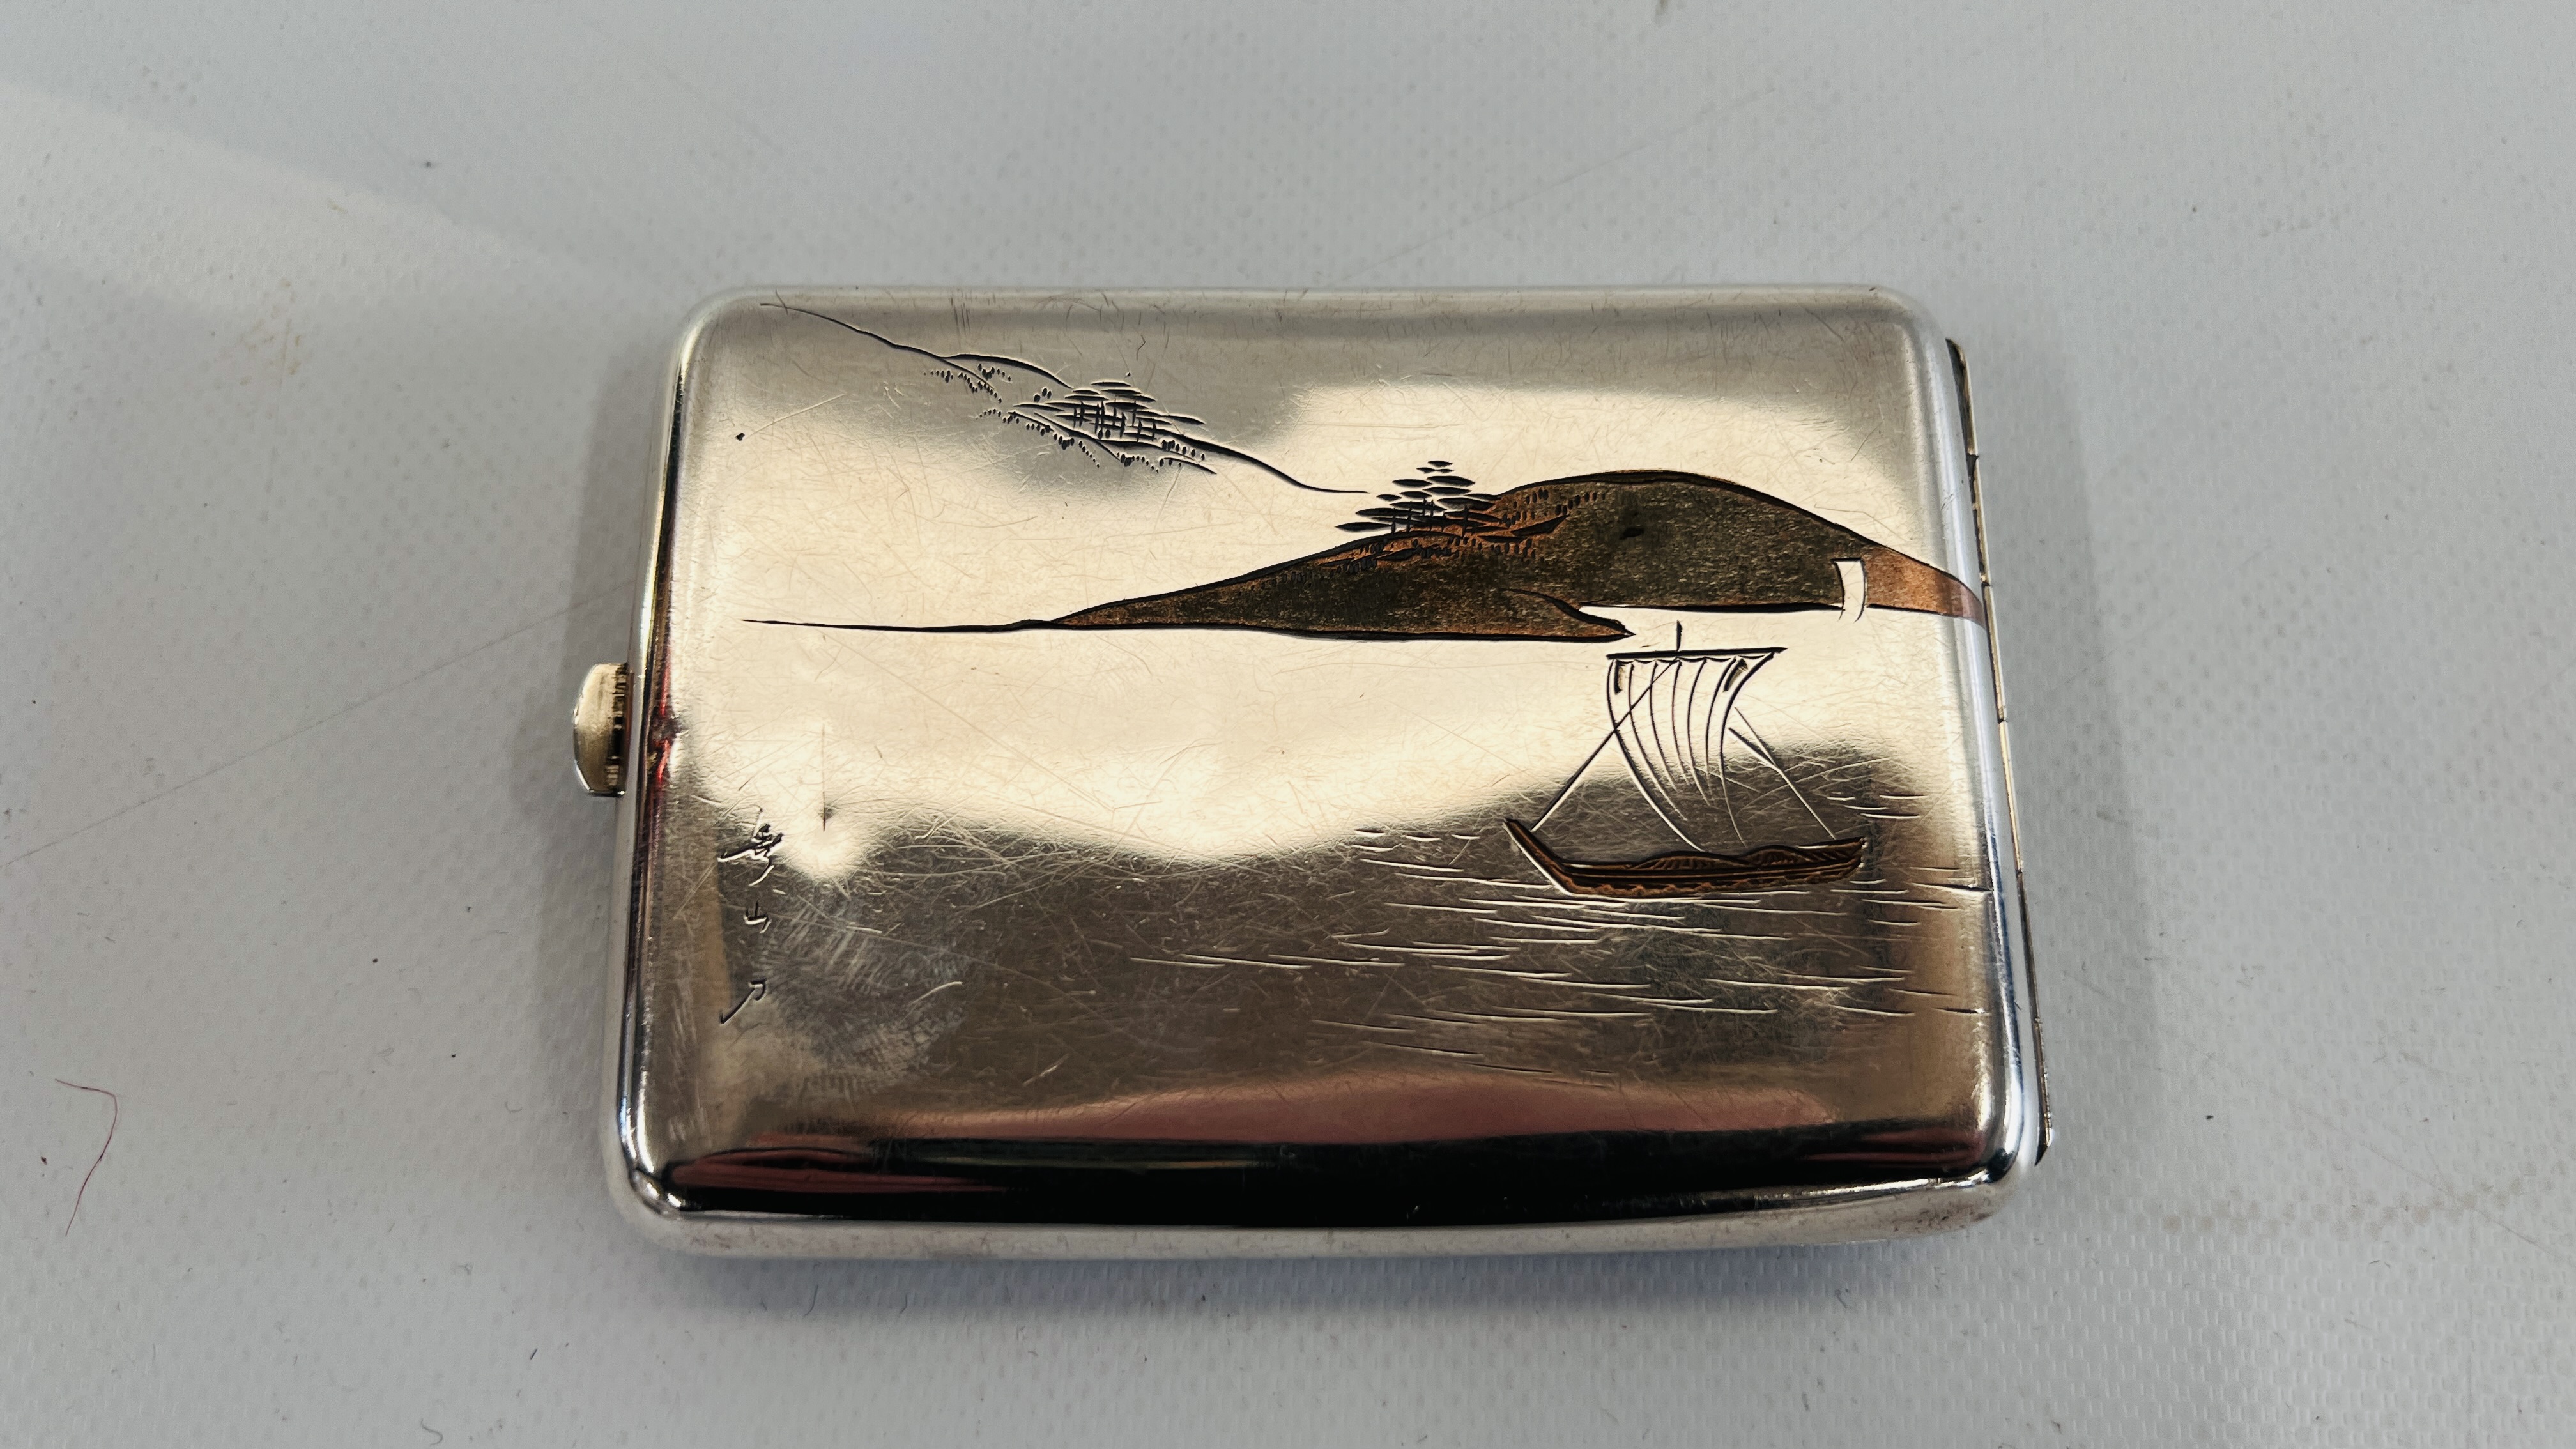 A JAPANESE STYLE SILVER AND MIXED METAL CIGARETTE CASE. L 11.5CM. X H 8CM. - Image 3 of 5